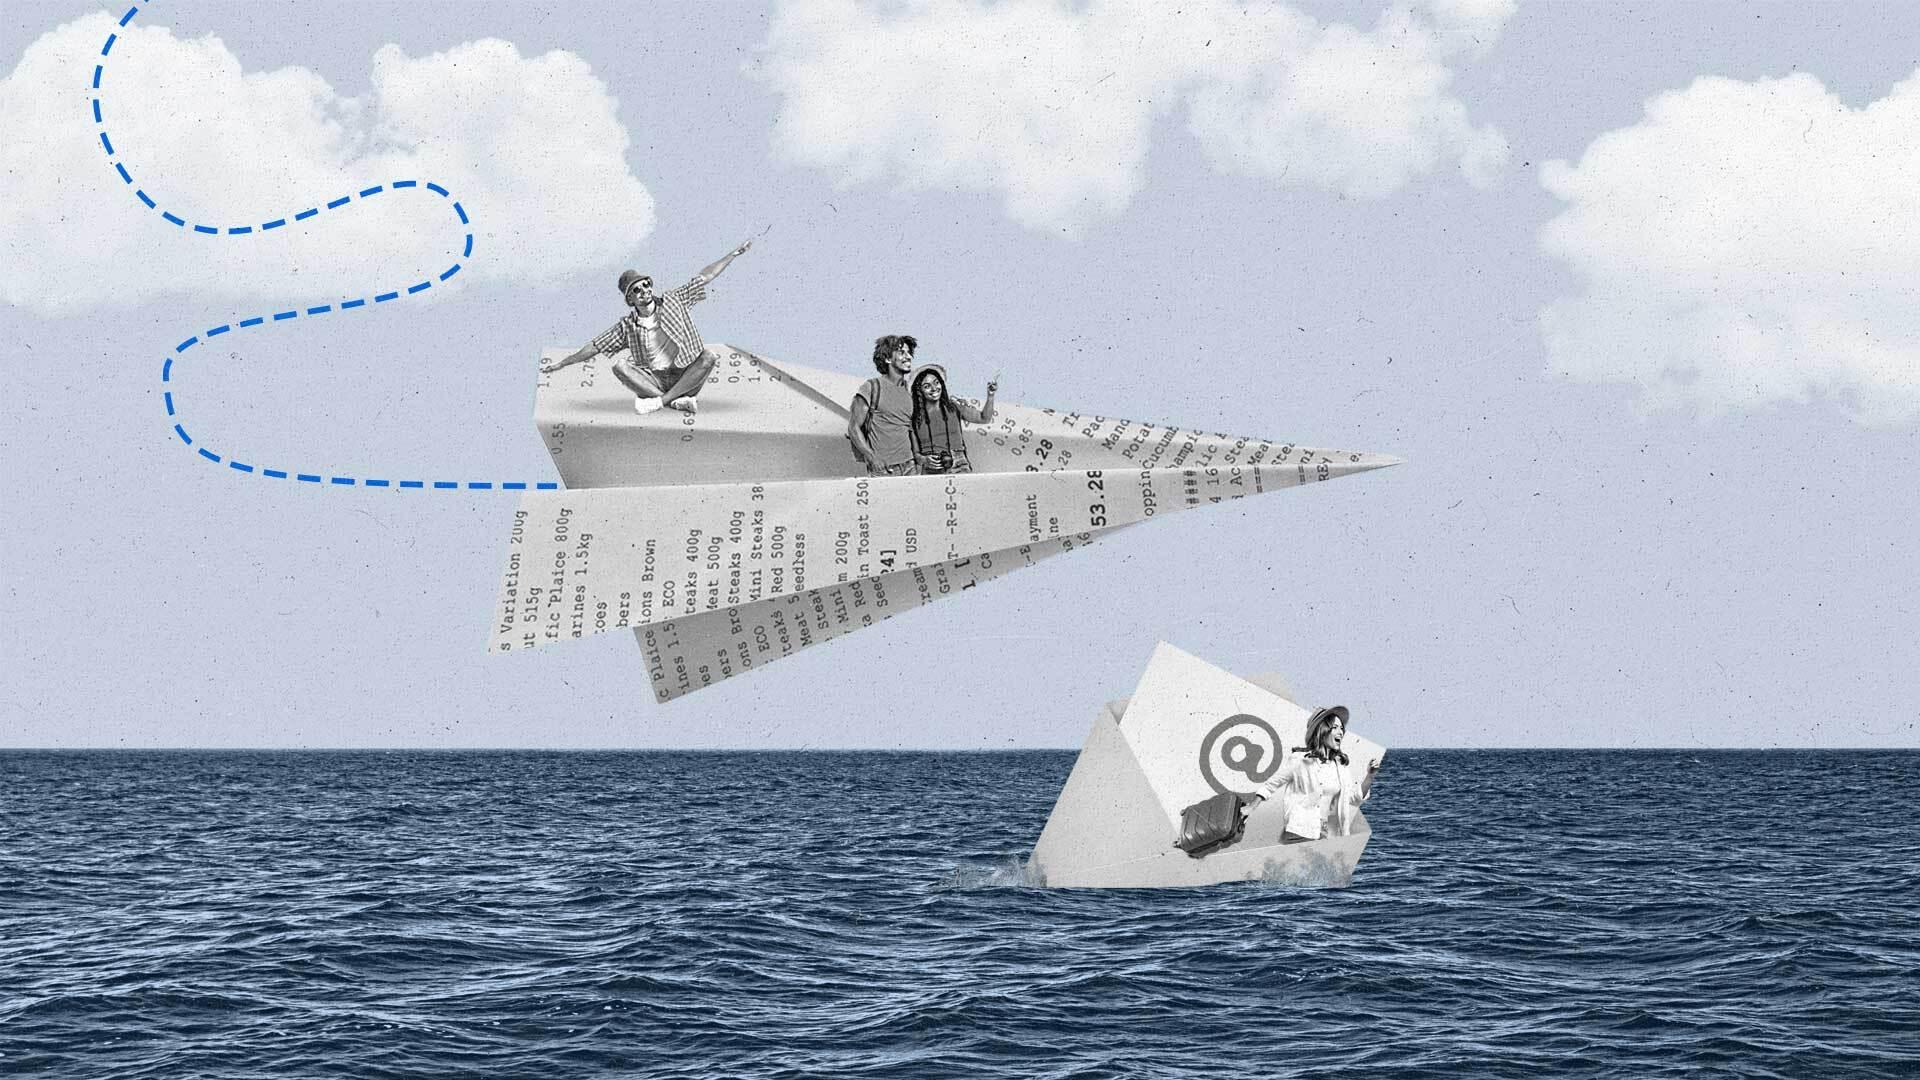 A paper airplane made of a receipt carrying two tourists flies above an envelope with an "email" symbol sailing in the ocean with a tourist inside.